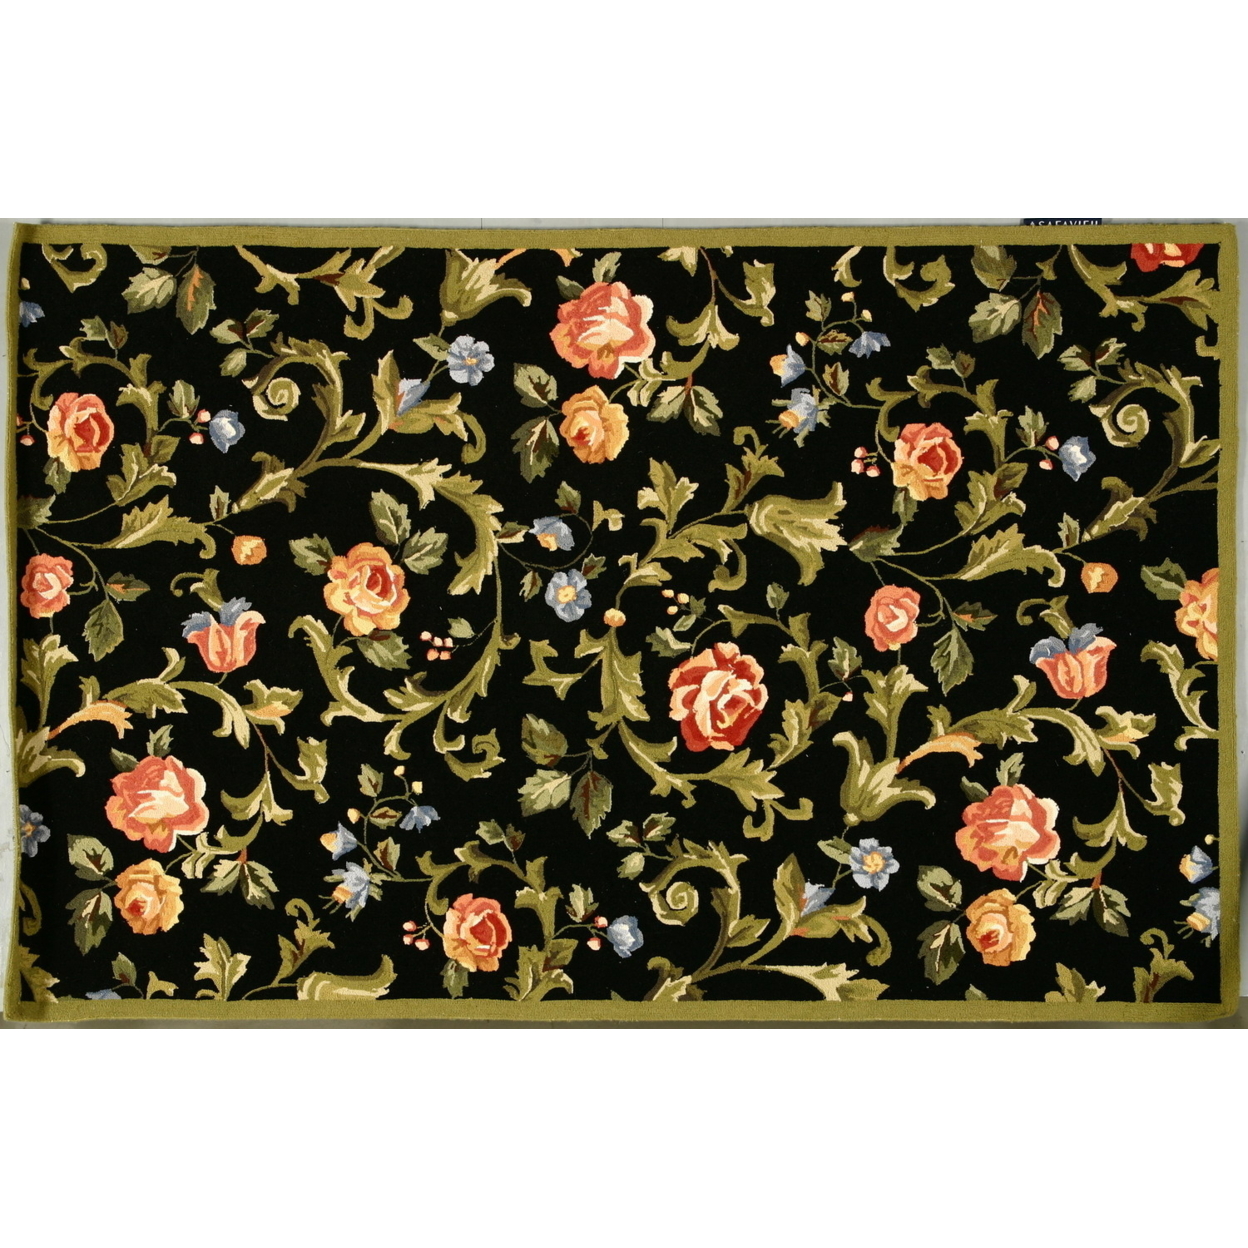 SAFAVIEH Chelsea Collection HK310B Hand-hooked Black Rug - 4' 6 X 6' 6 Oval